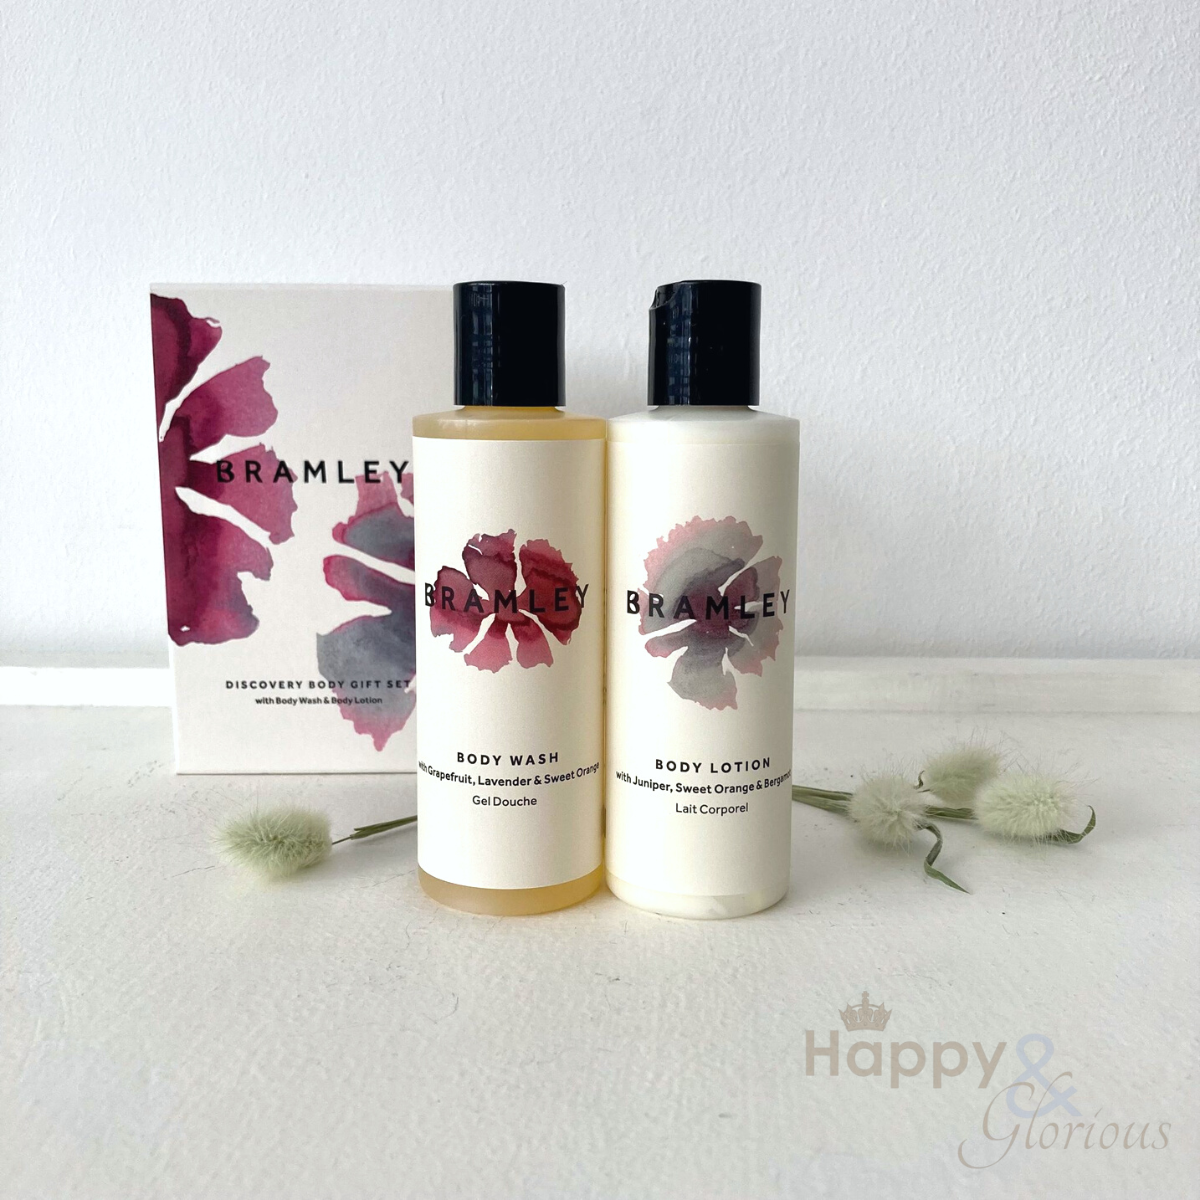 Small body wash & body lotion gift set by Bramley Products